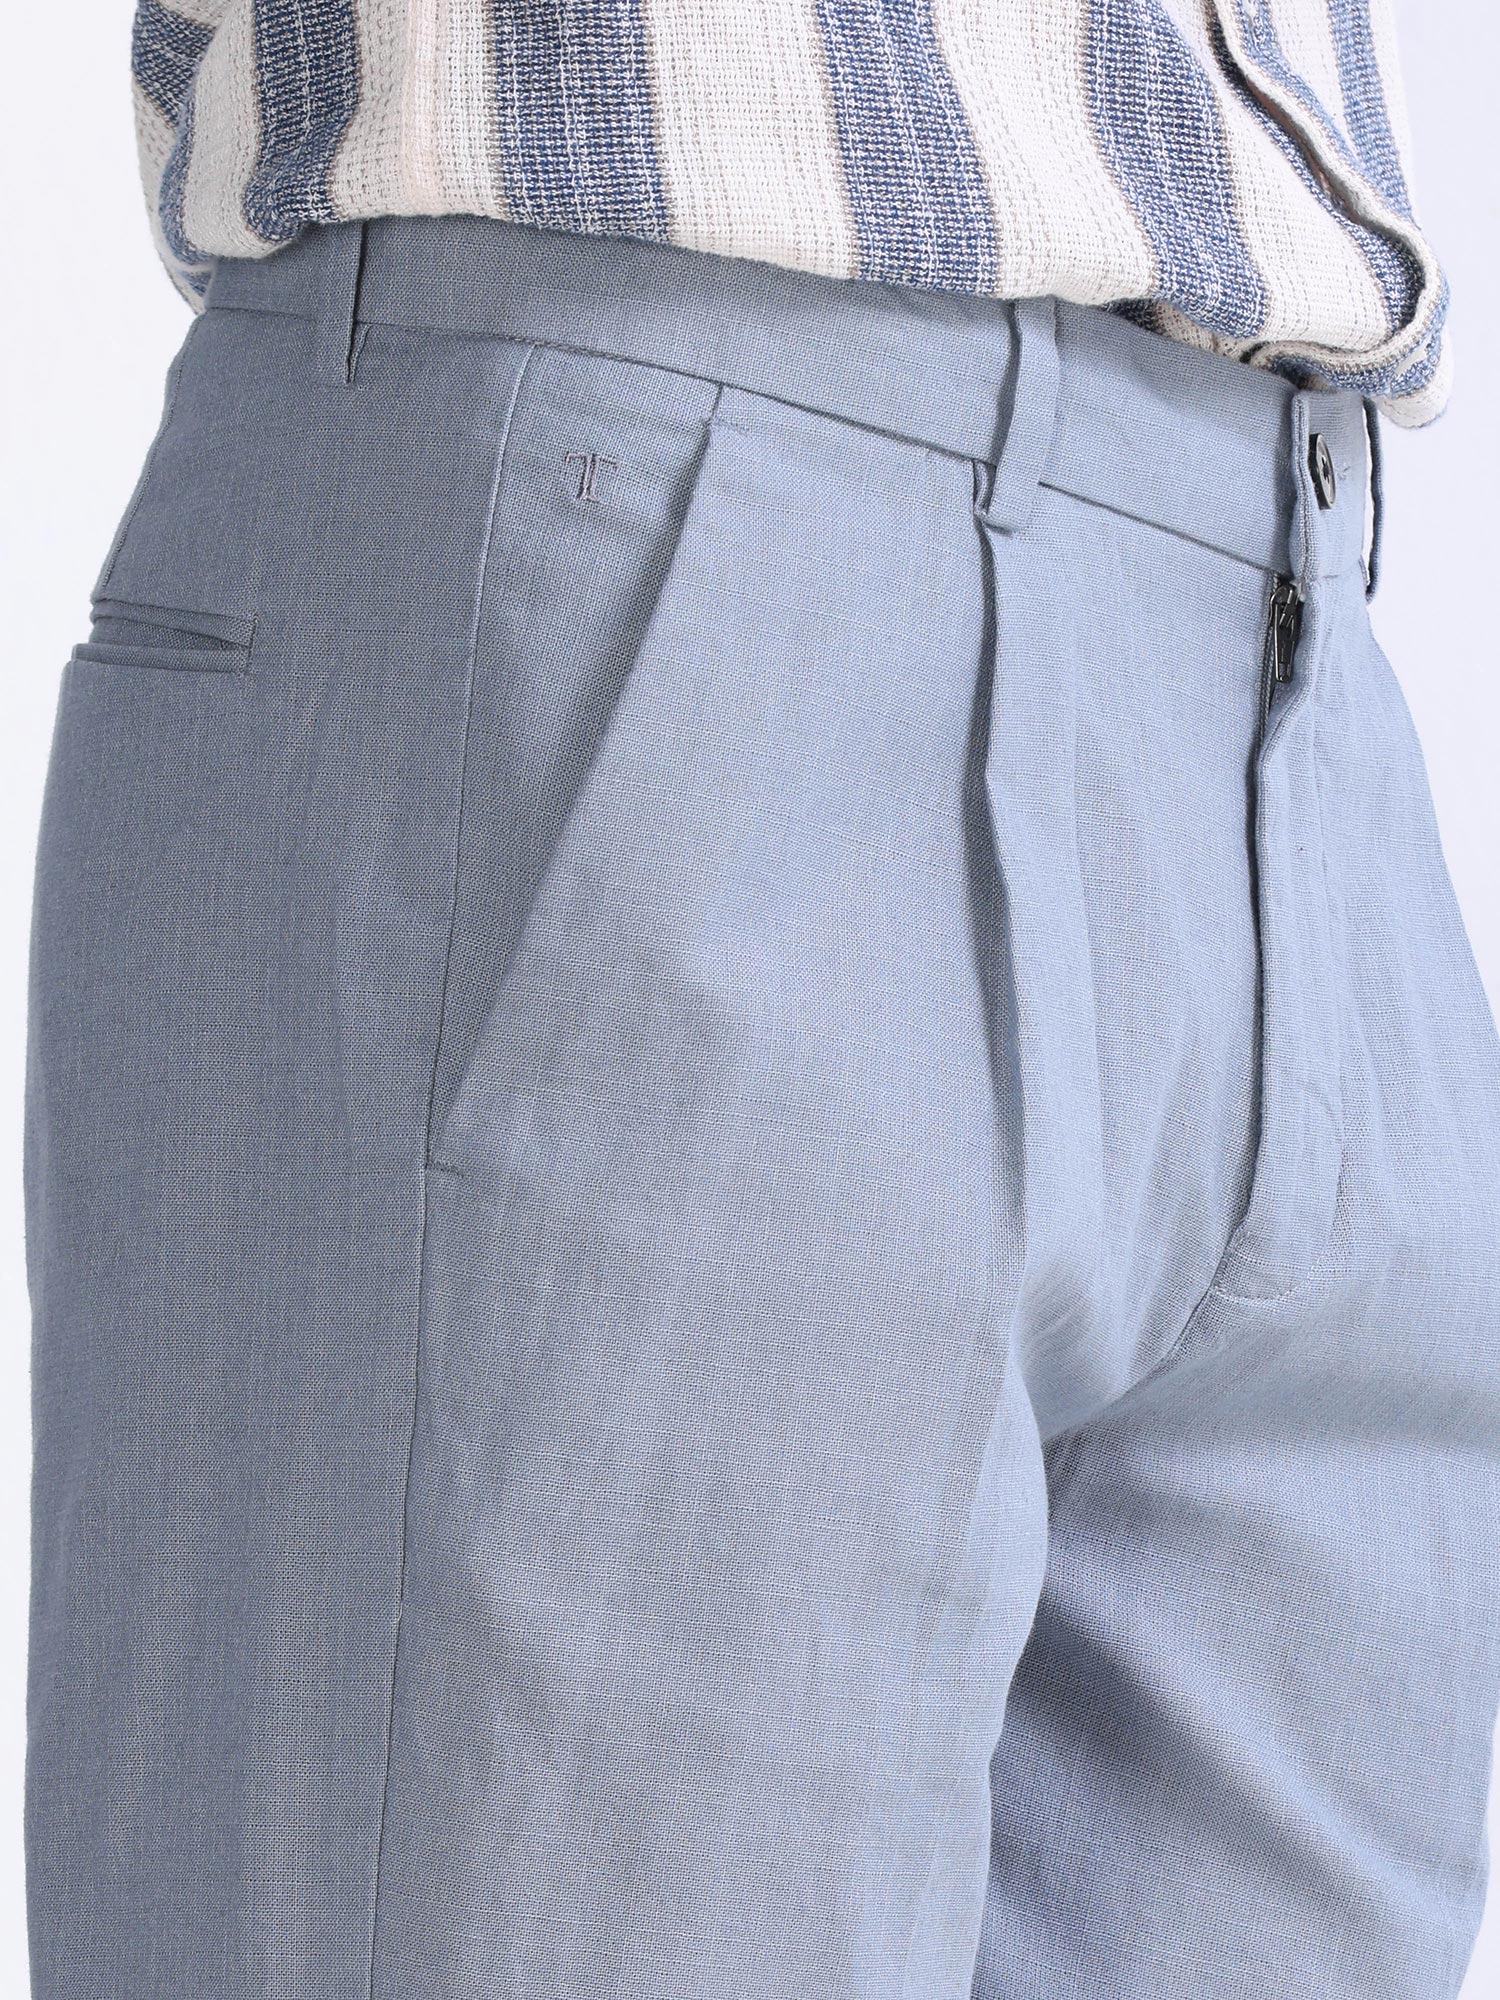 Men's Linen Trousers | Loose Fit Pants with Button and Zipper